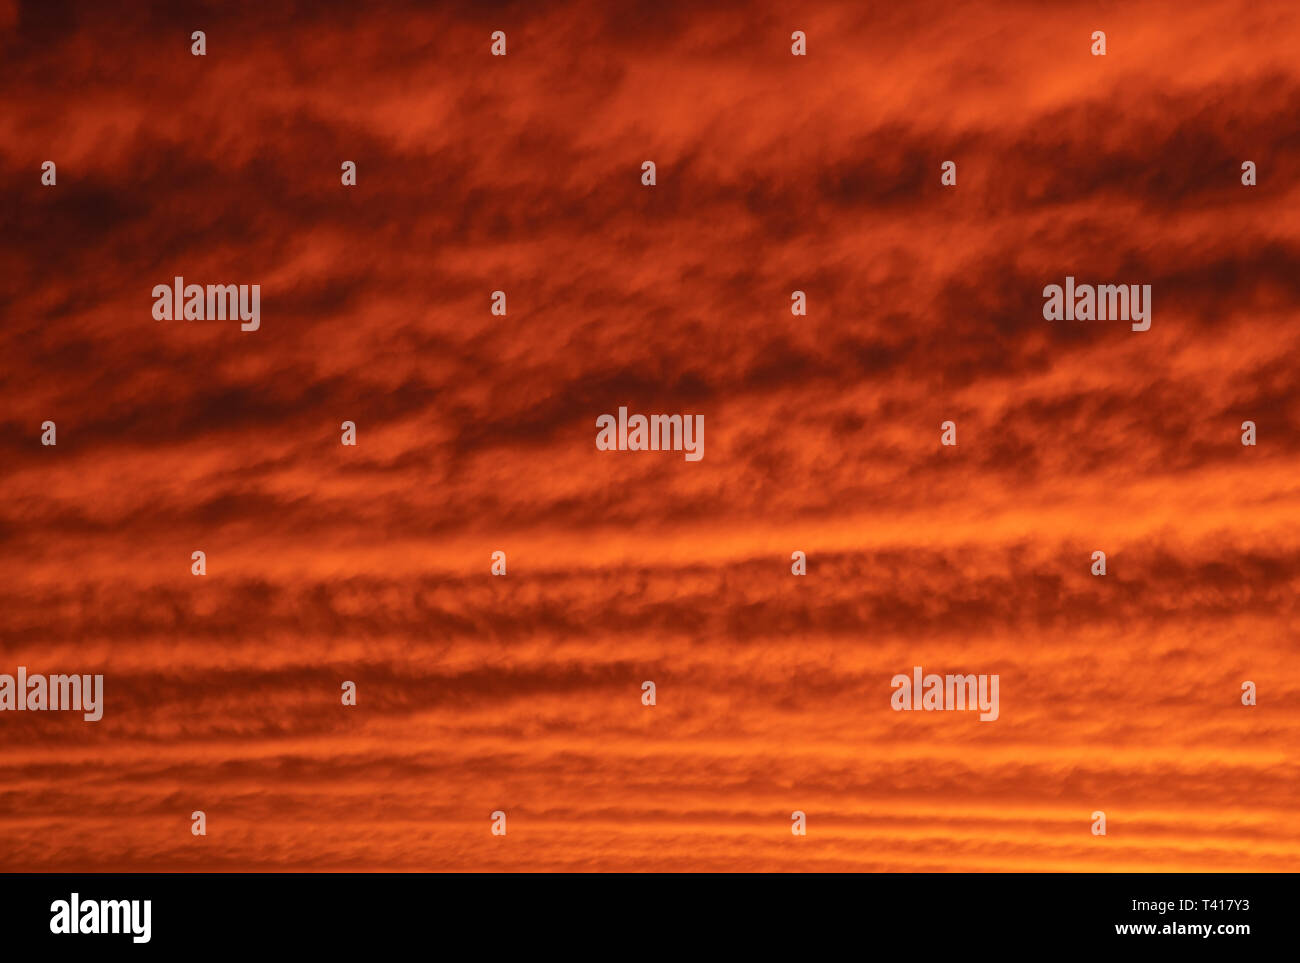 Mackerel sky at sunset with vibrant orange and yellow clouds undulating across the view Stock Photo